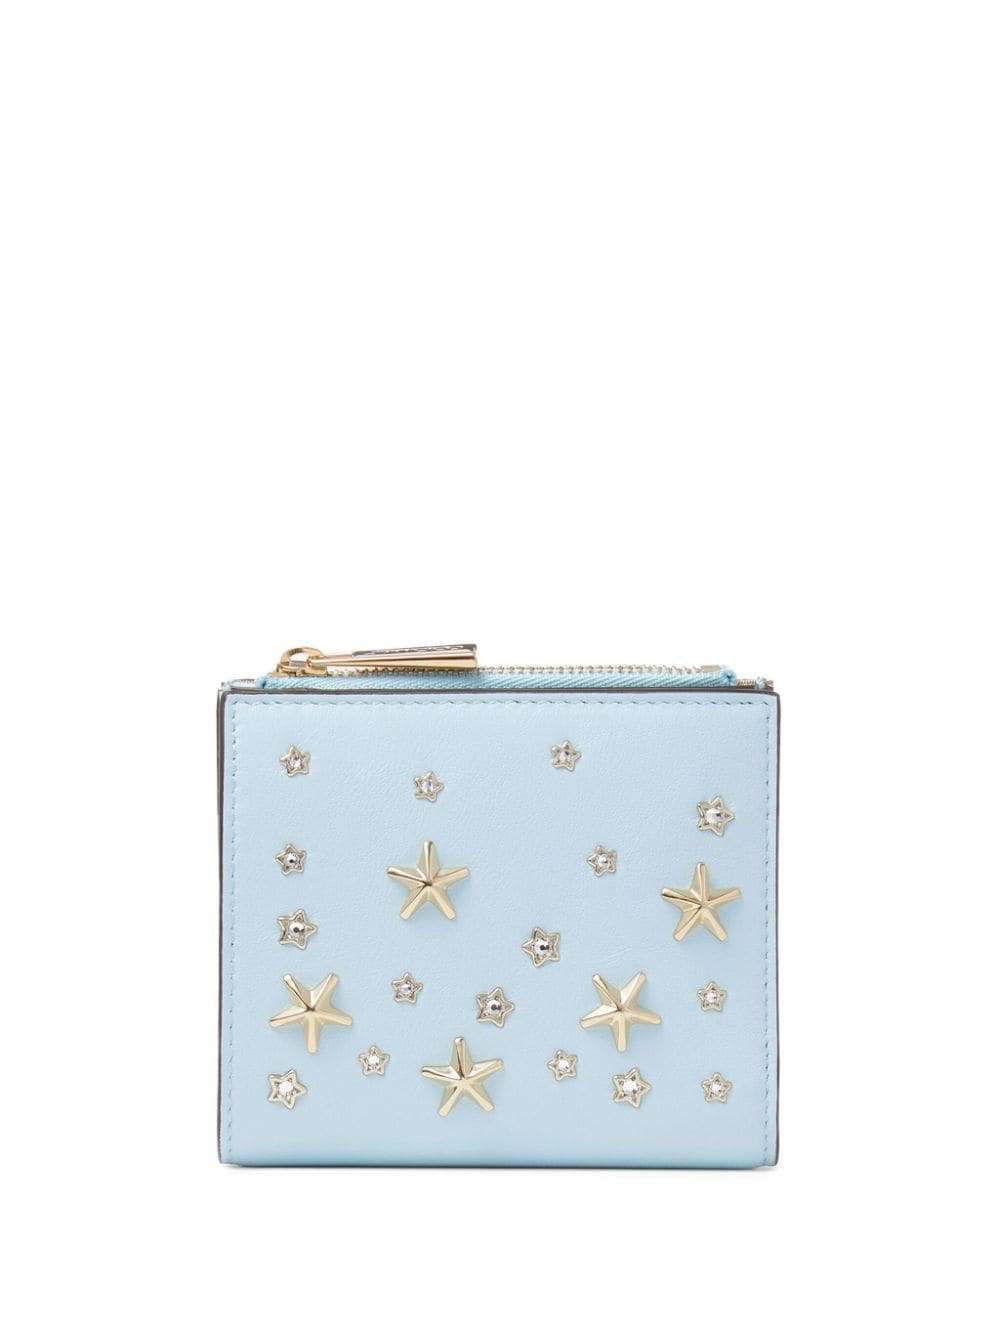 Jimmy Choo Hanni Crystal-embellished Leather Purse In Ice Blue/light Gold